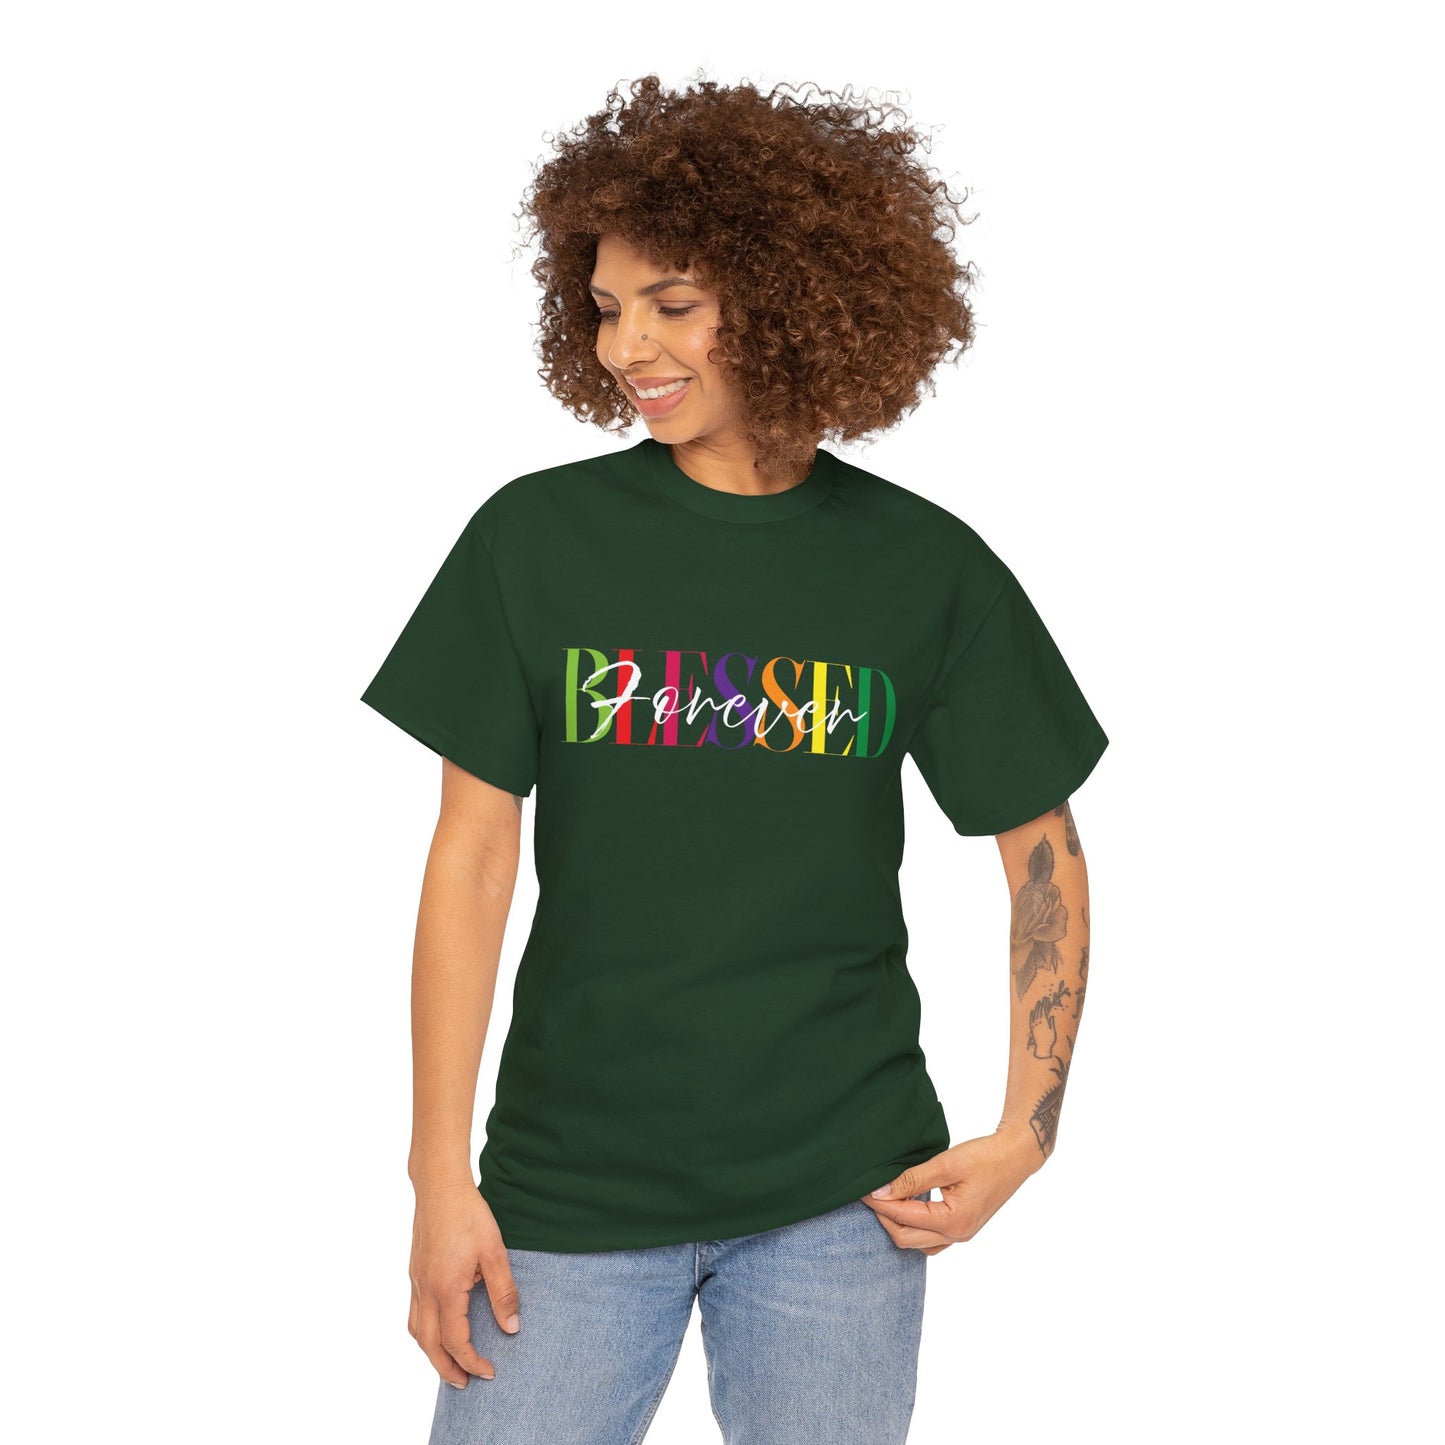 Unisex 100% Cotton T-shirt, "Forever Blessed"